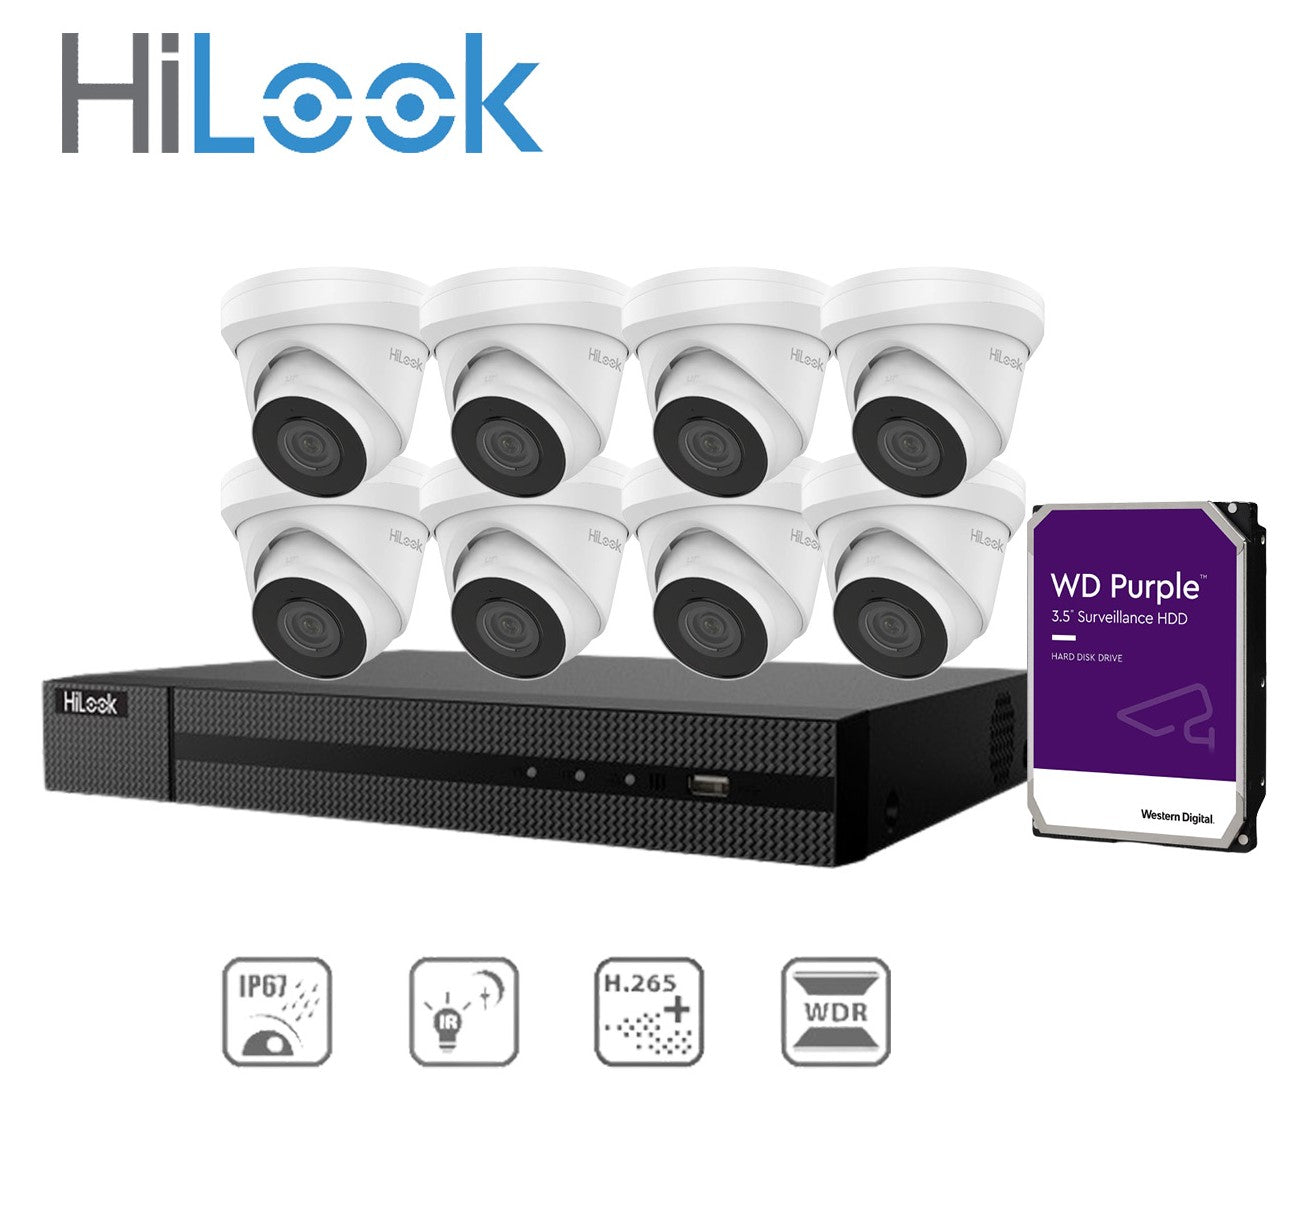 HiLook 8x 4MP IP cameras IPC-T240H-MU + Hilook 8 Channel PoE NVR 4K + WD HDD Kit